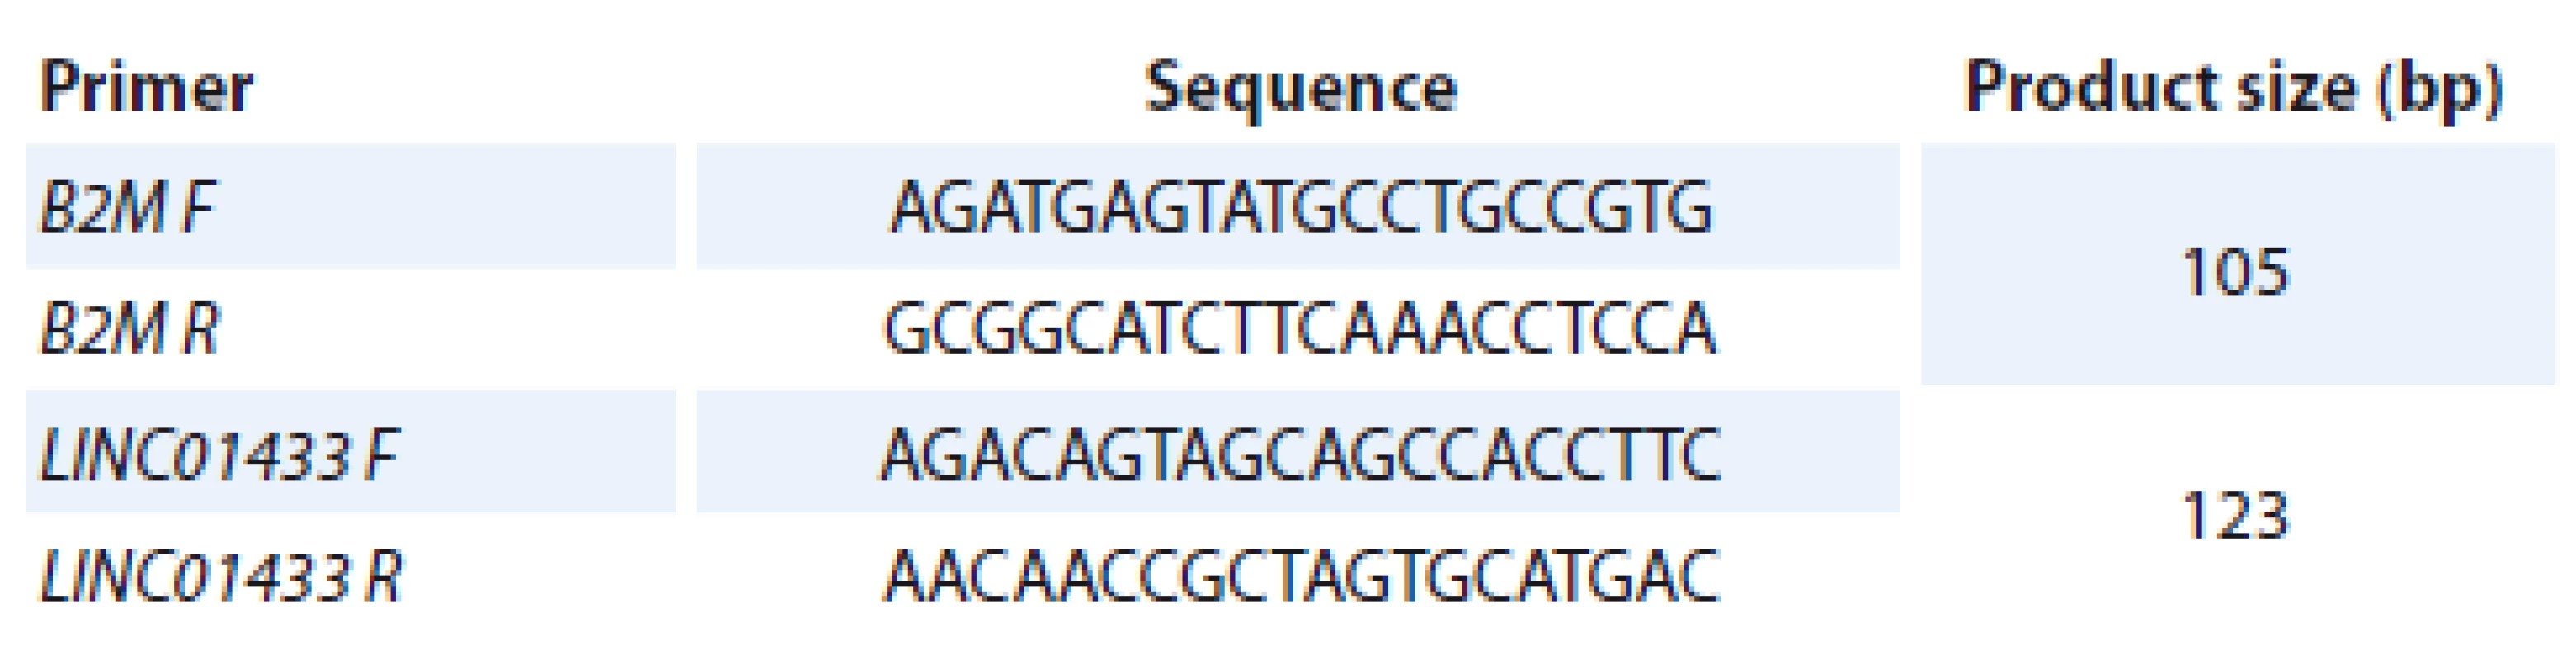 The sequences of primers used for assessment of LINC01433 levels.